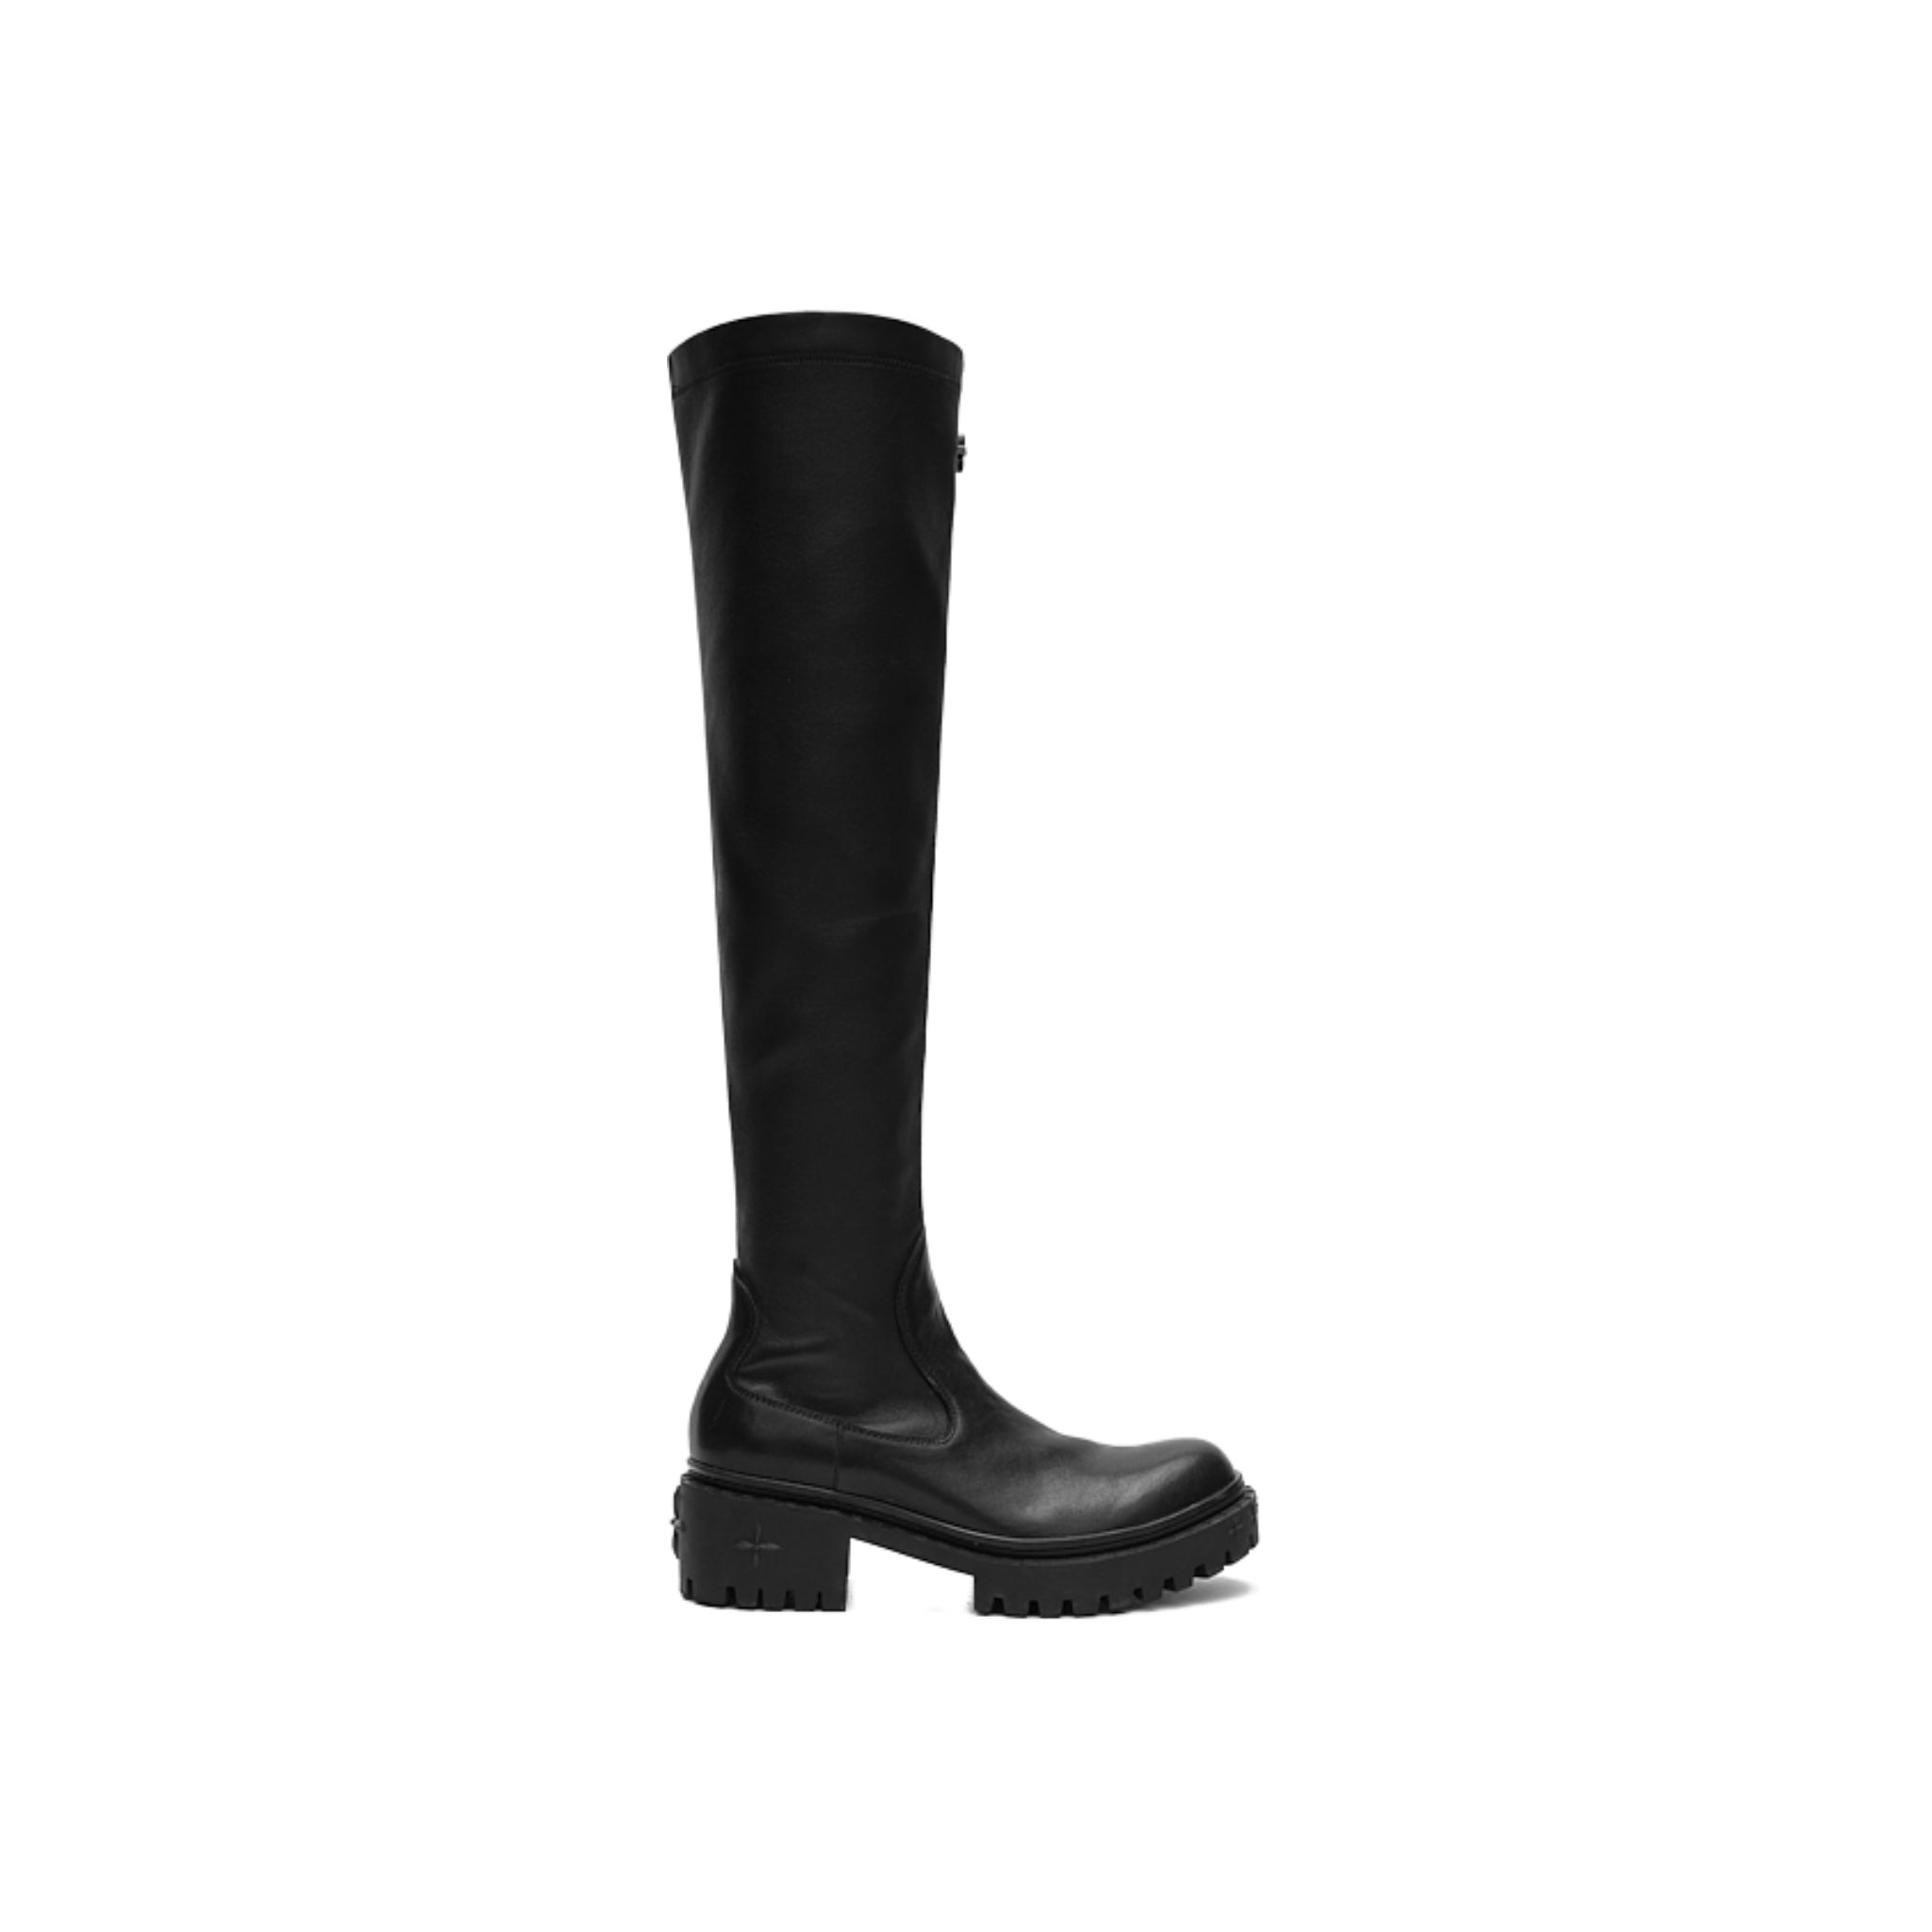 SMFK Black Compass Tall Military Boots | MADA IN CHINA